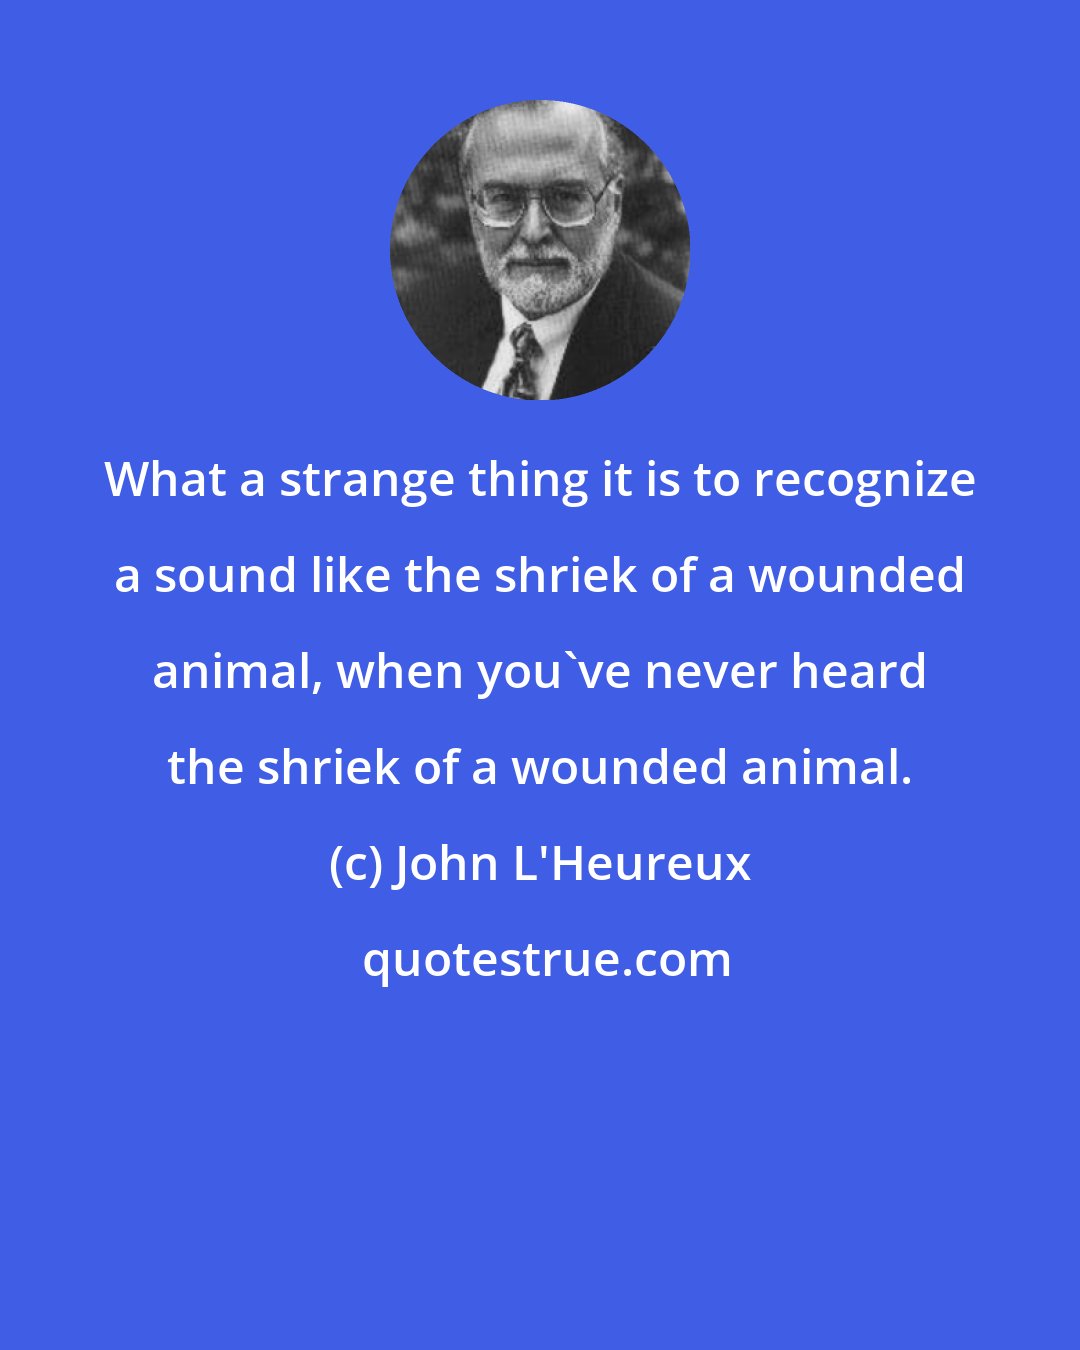 John L'Heureux: What a strange thing it is to recognize a sound like the shriek of a wounded animal, when you've never heard the shriek of a wounded animal.